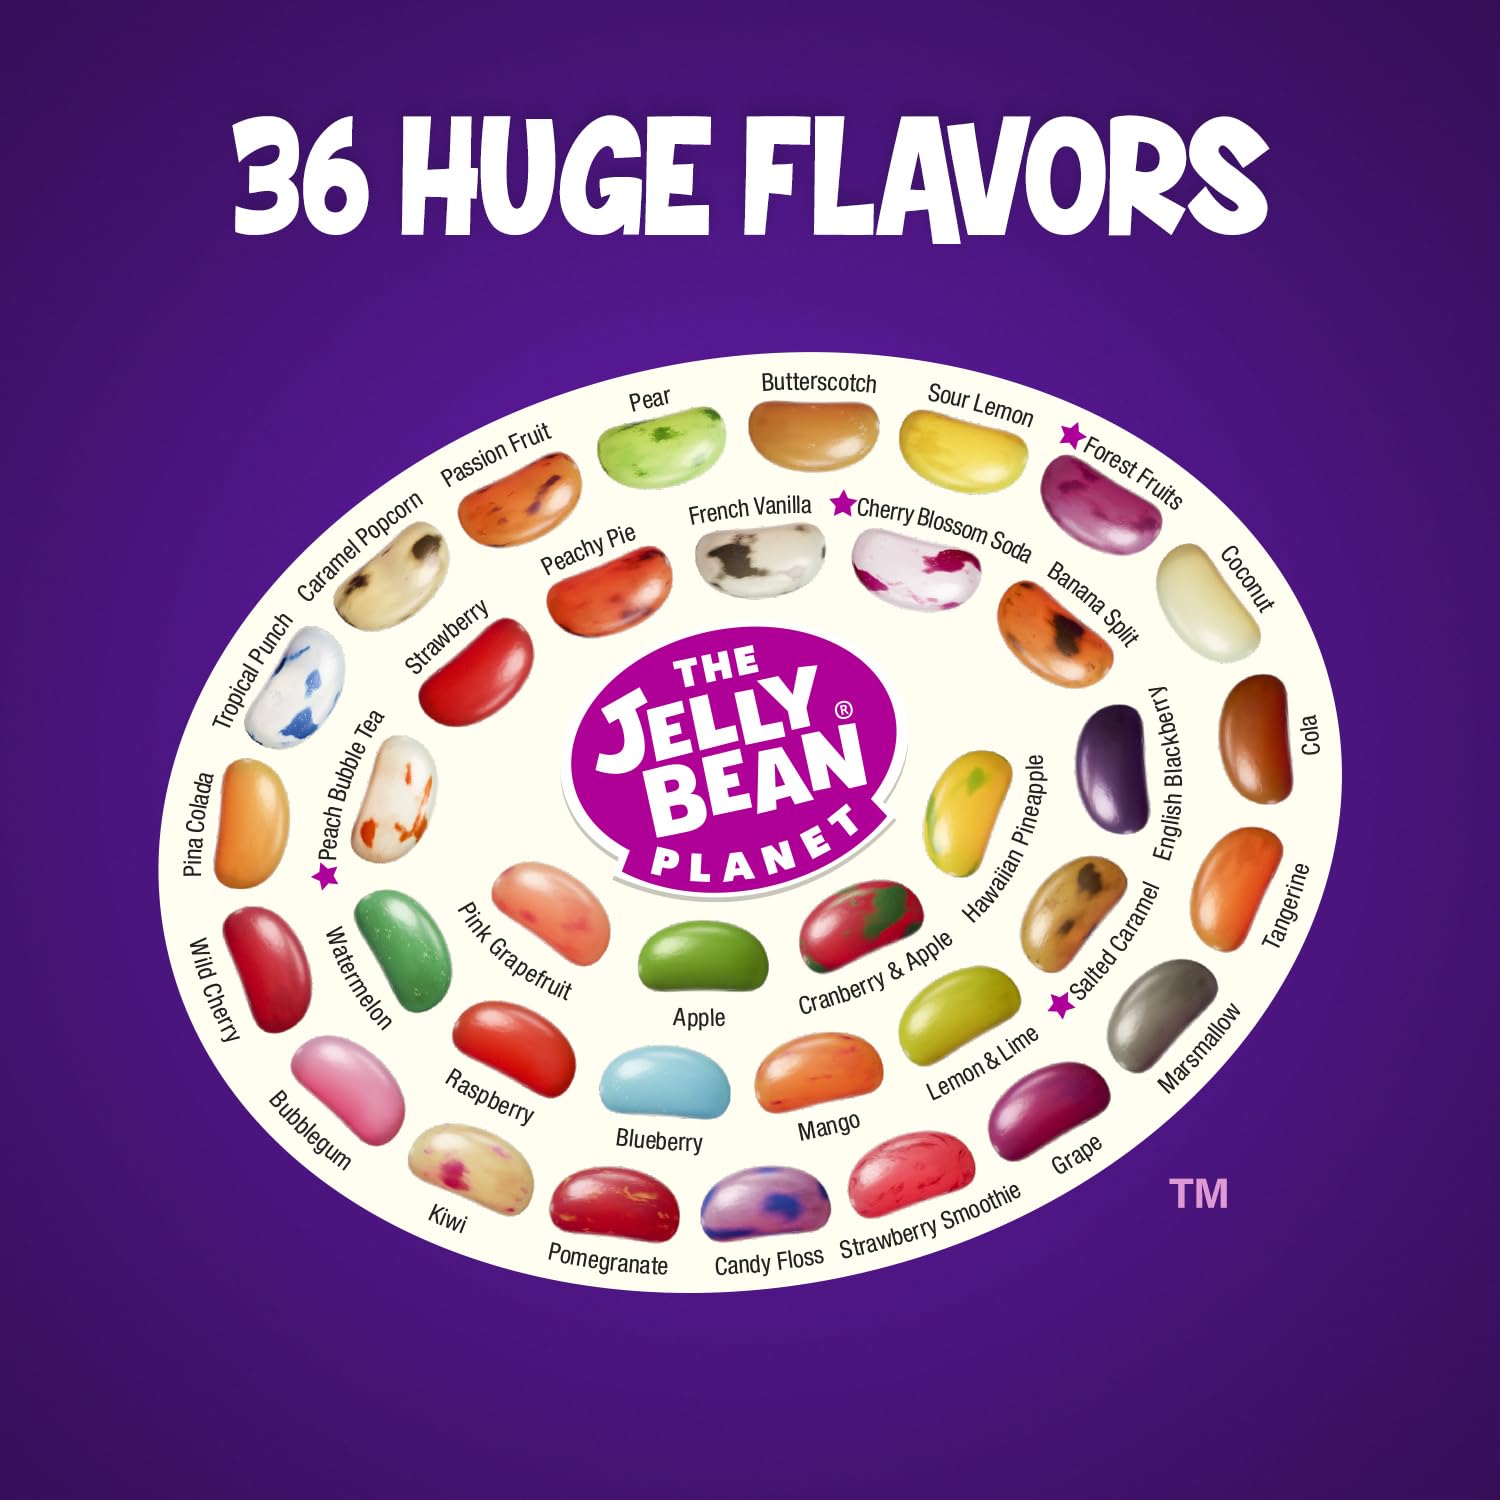 The Jelly Bean Planet 36 Huge Flavors 42.5 oz Jar - Jelly Beans - Chewy Fruit Flavored Candy - Gluten free Snacks - Candy Bulk - Party Gift